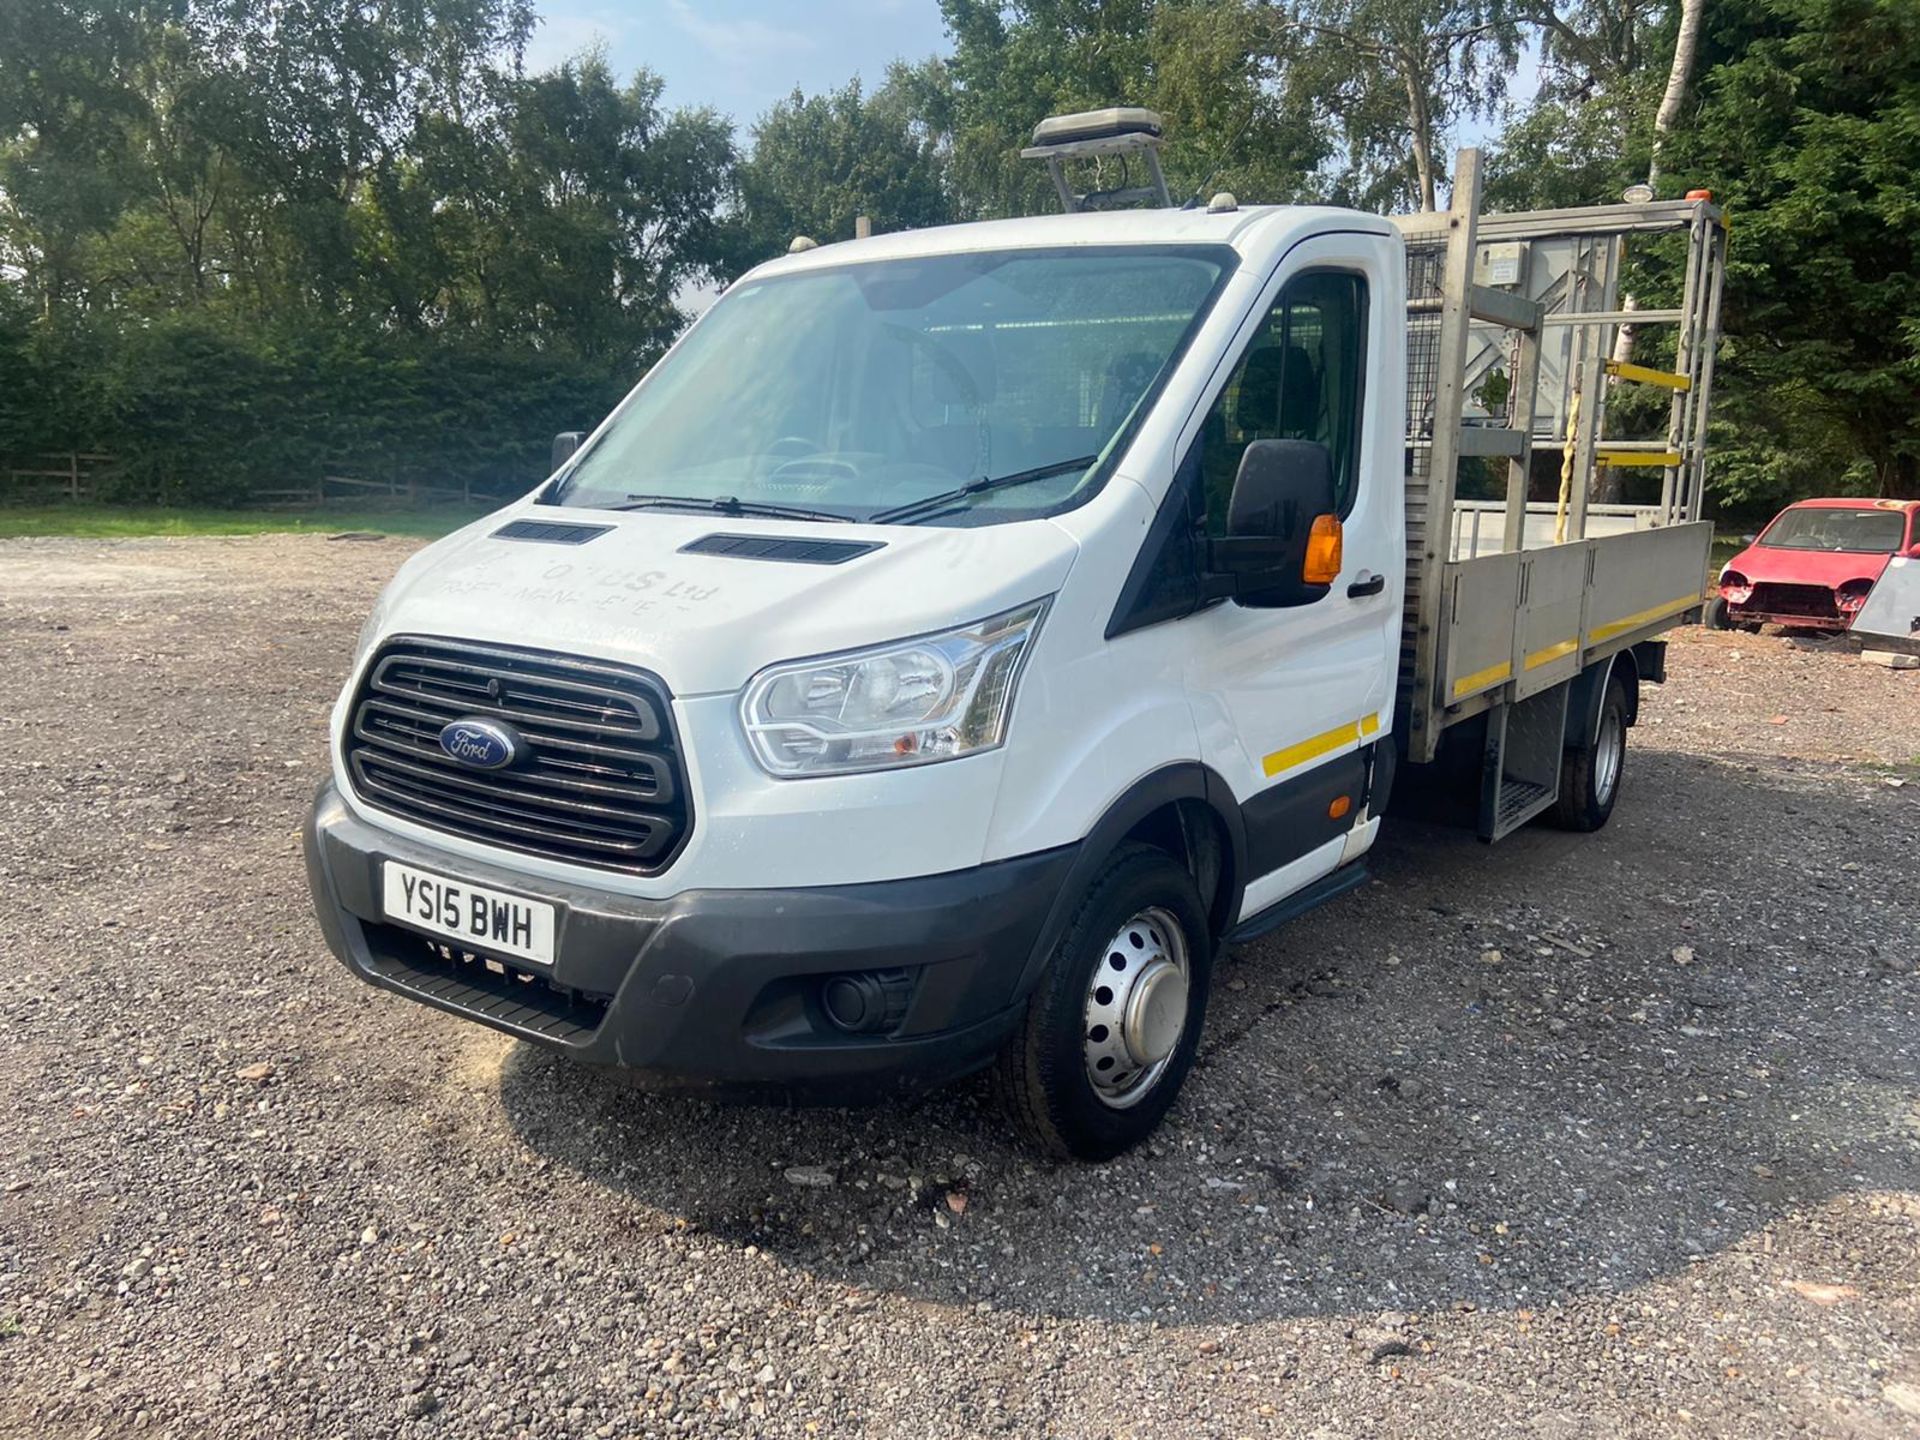 2015/15 REG FORD TRANSIT 350 WHITE DROPSIDE LORRY 2.2 DIESEL, SHOWING 0 FORMER KEEPERS *PLUS VAT* - Image 4 of 10